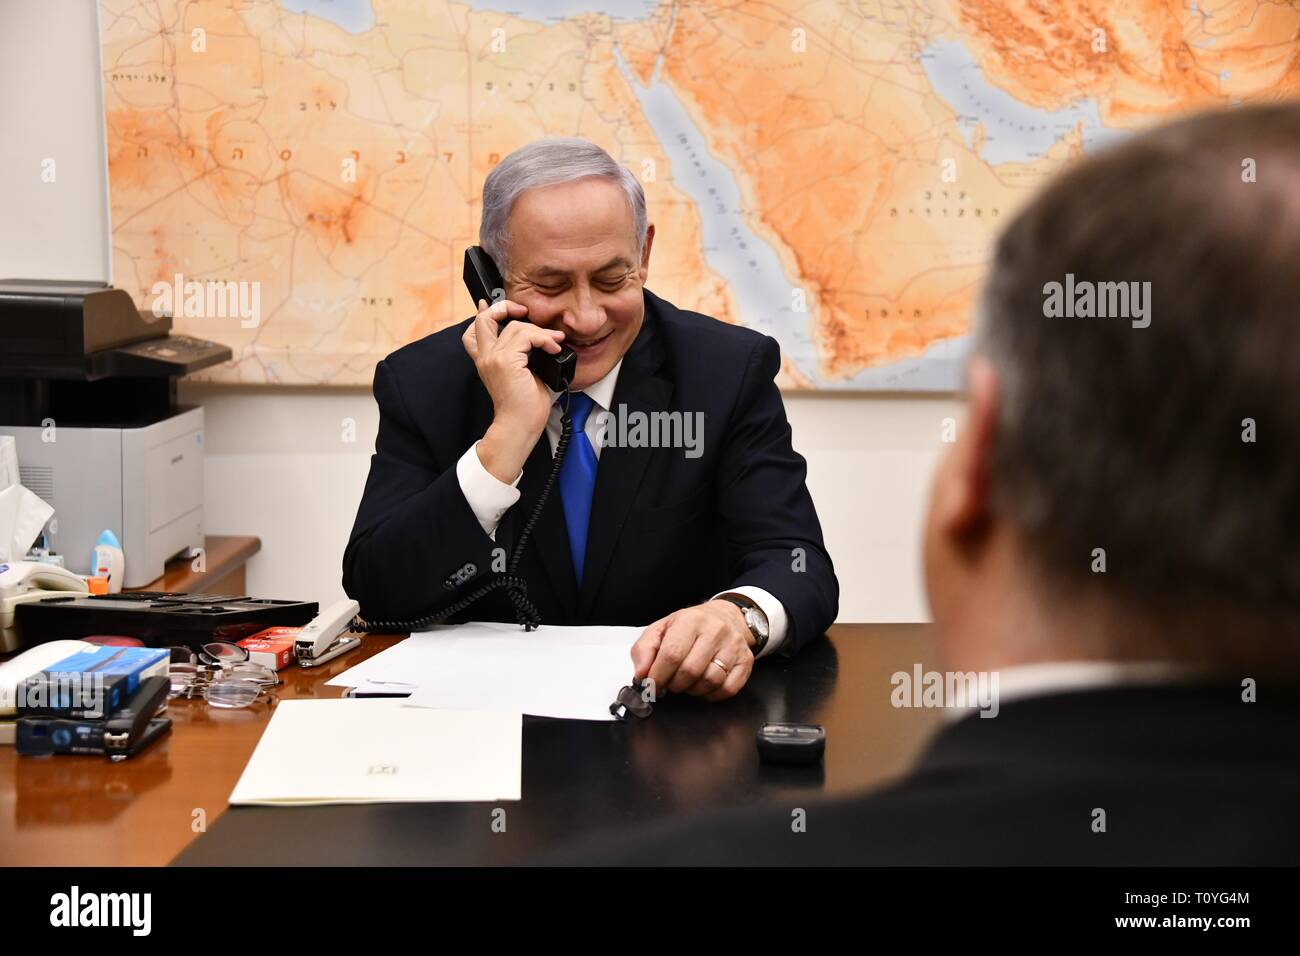 Israeli Prime Minister Benjamin Netanyahu smiles as he speaks by phone with U.S. President Donald Trump from his office March 21, 2019 in Jerusalem, Israel. Trump surprised Netanyahu telling him the U.S. will recognize Israeli sovereignty over the occupied Golan Heights, which it captured from Syria in 1967. Stock Photo